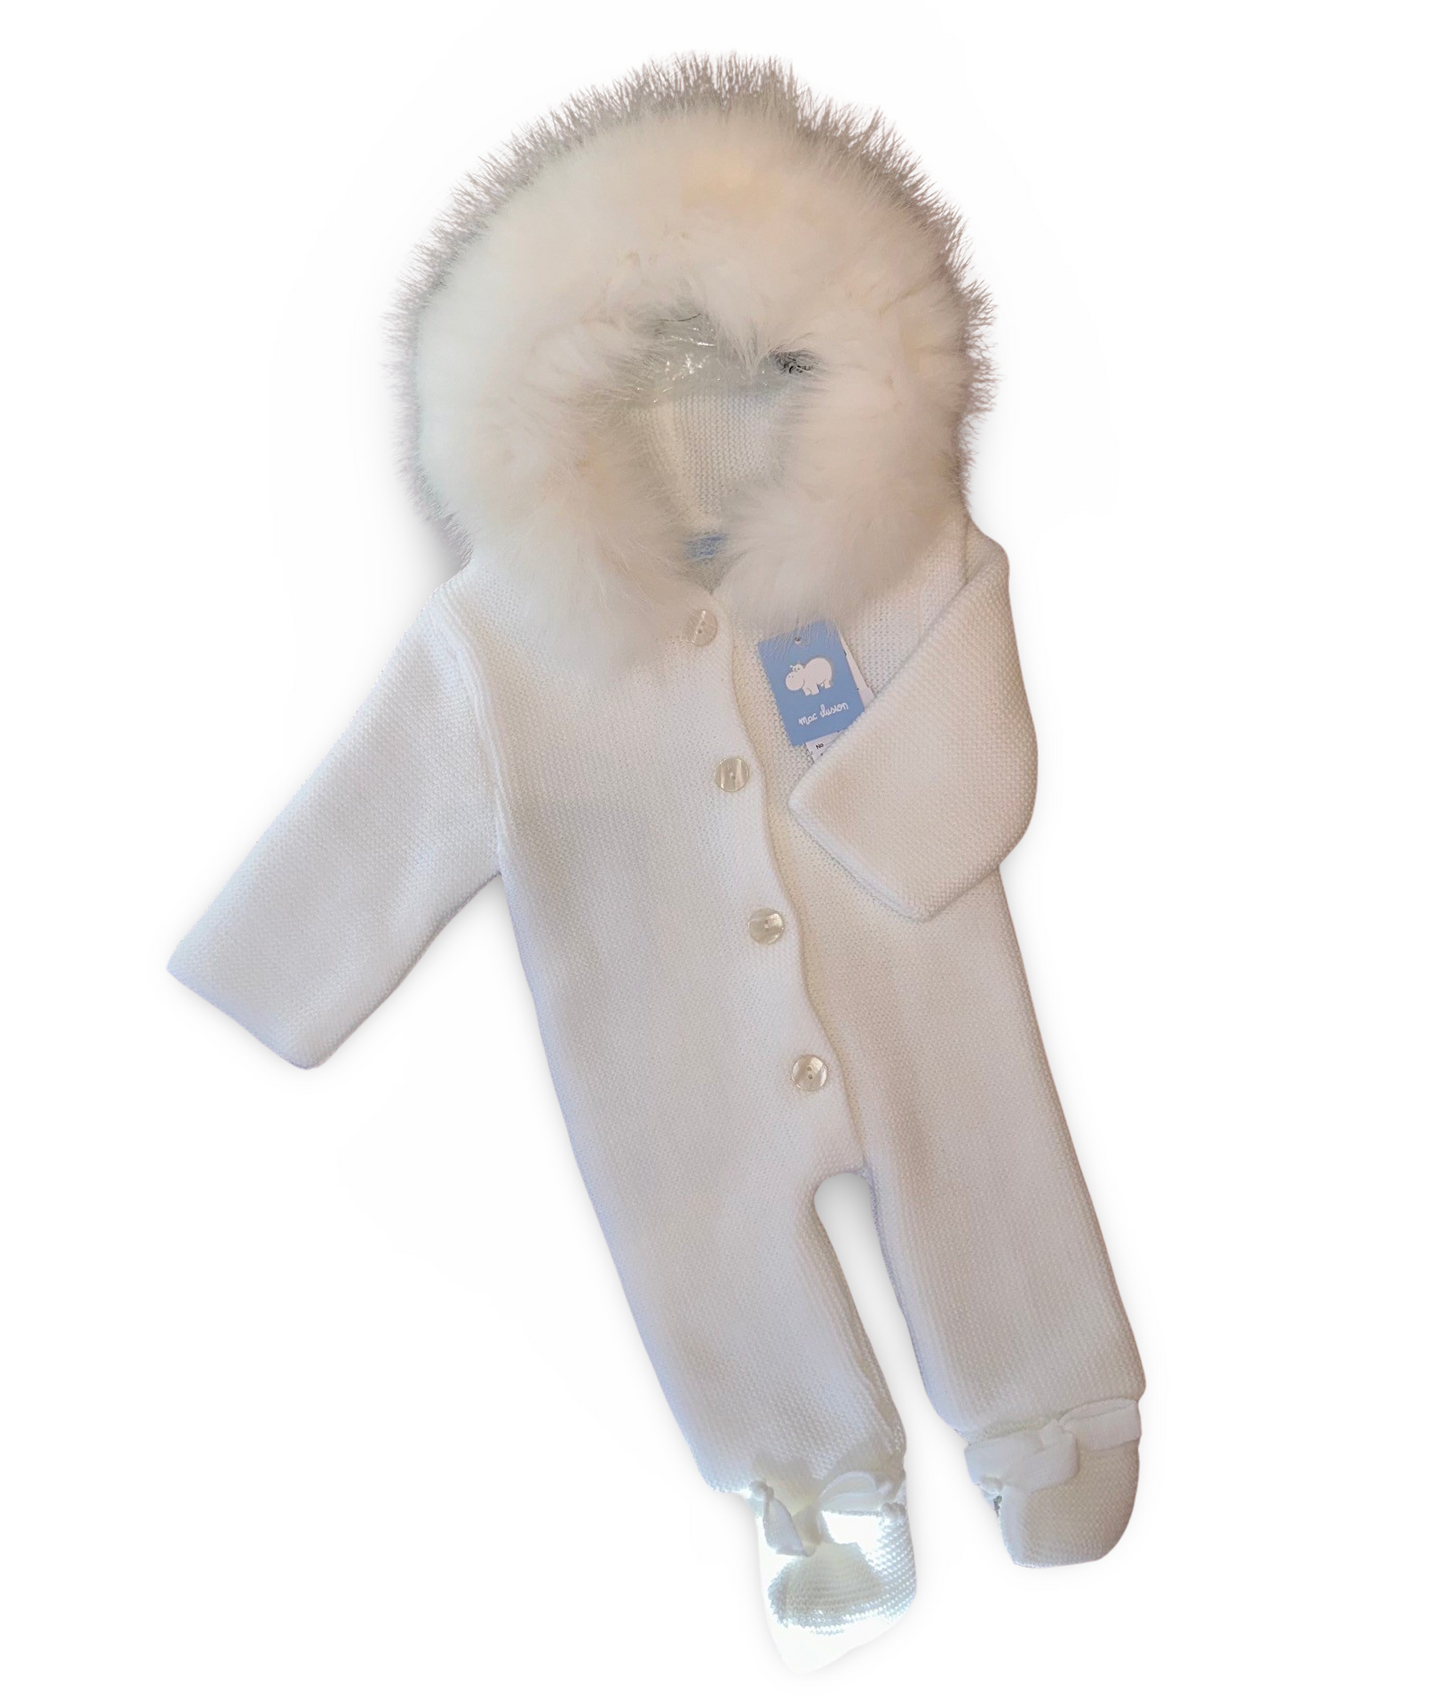 Mac Illusion White Knitted All-in-one pram suit with Fur collar